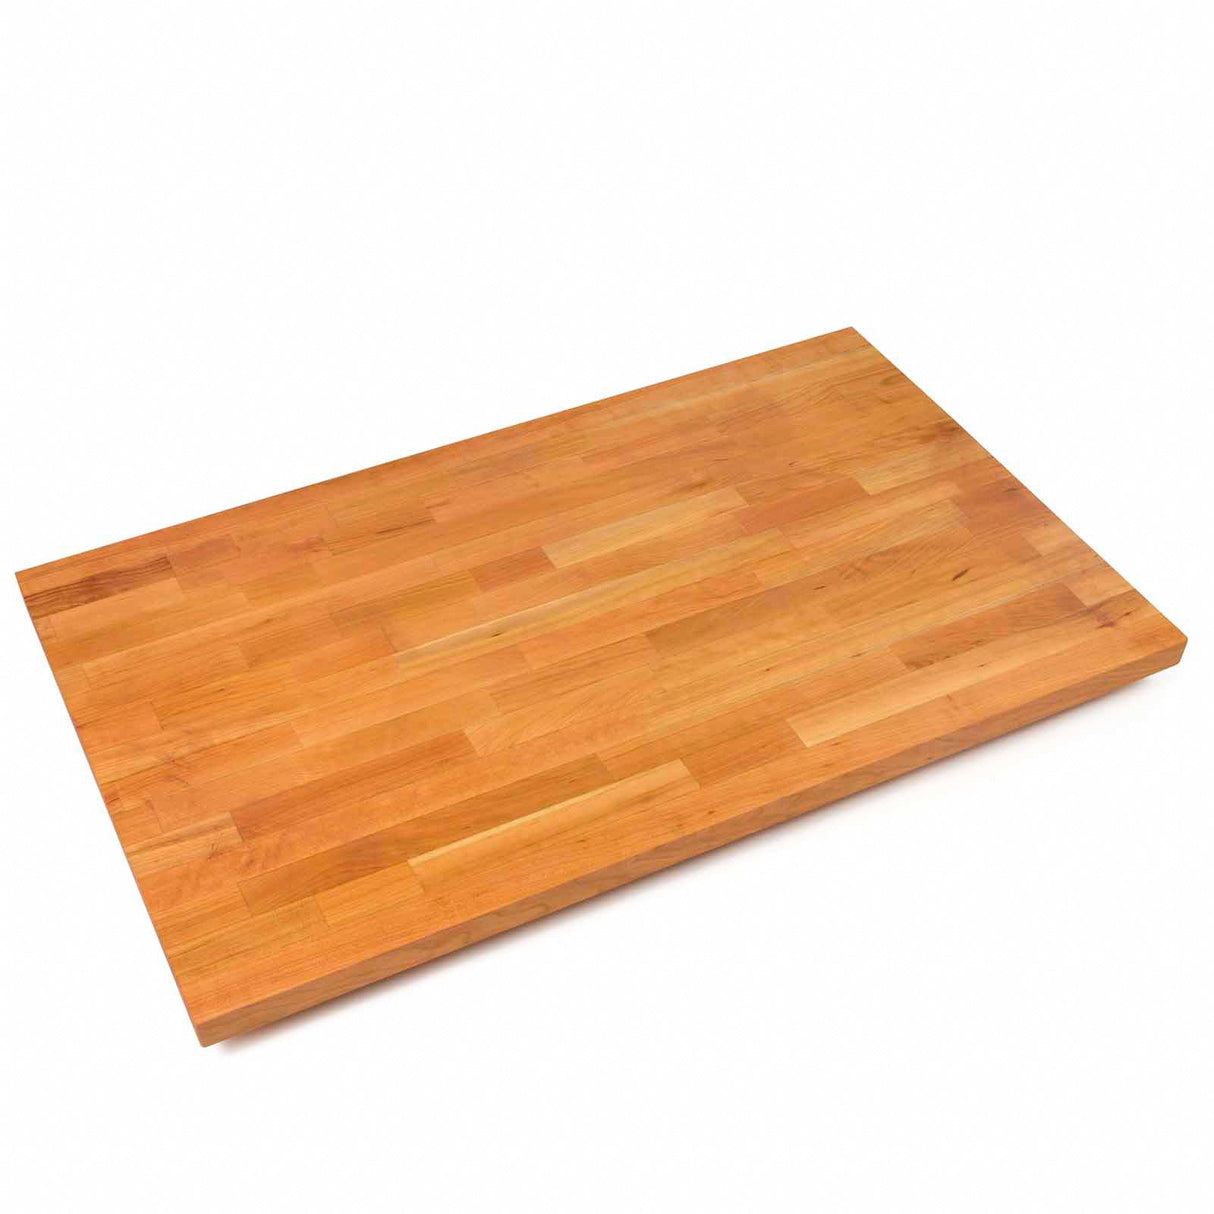 John Boos CHYKCT-BL3025-O Blended Cherry Counter Top with Oil Finish, 1.5" Thickness, 30" x 25" CHERRY BLENDED KCT 30X25X1-1/2 OIL